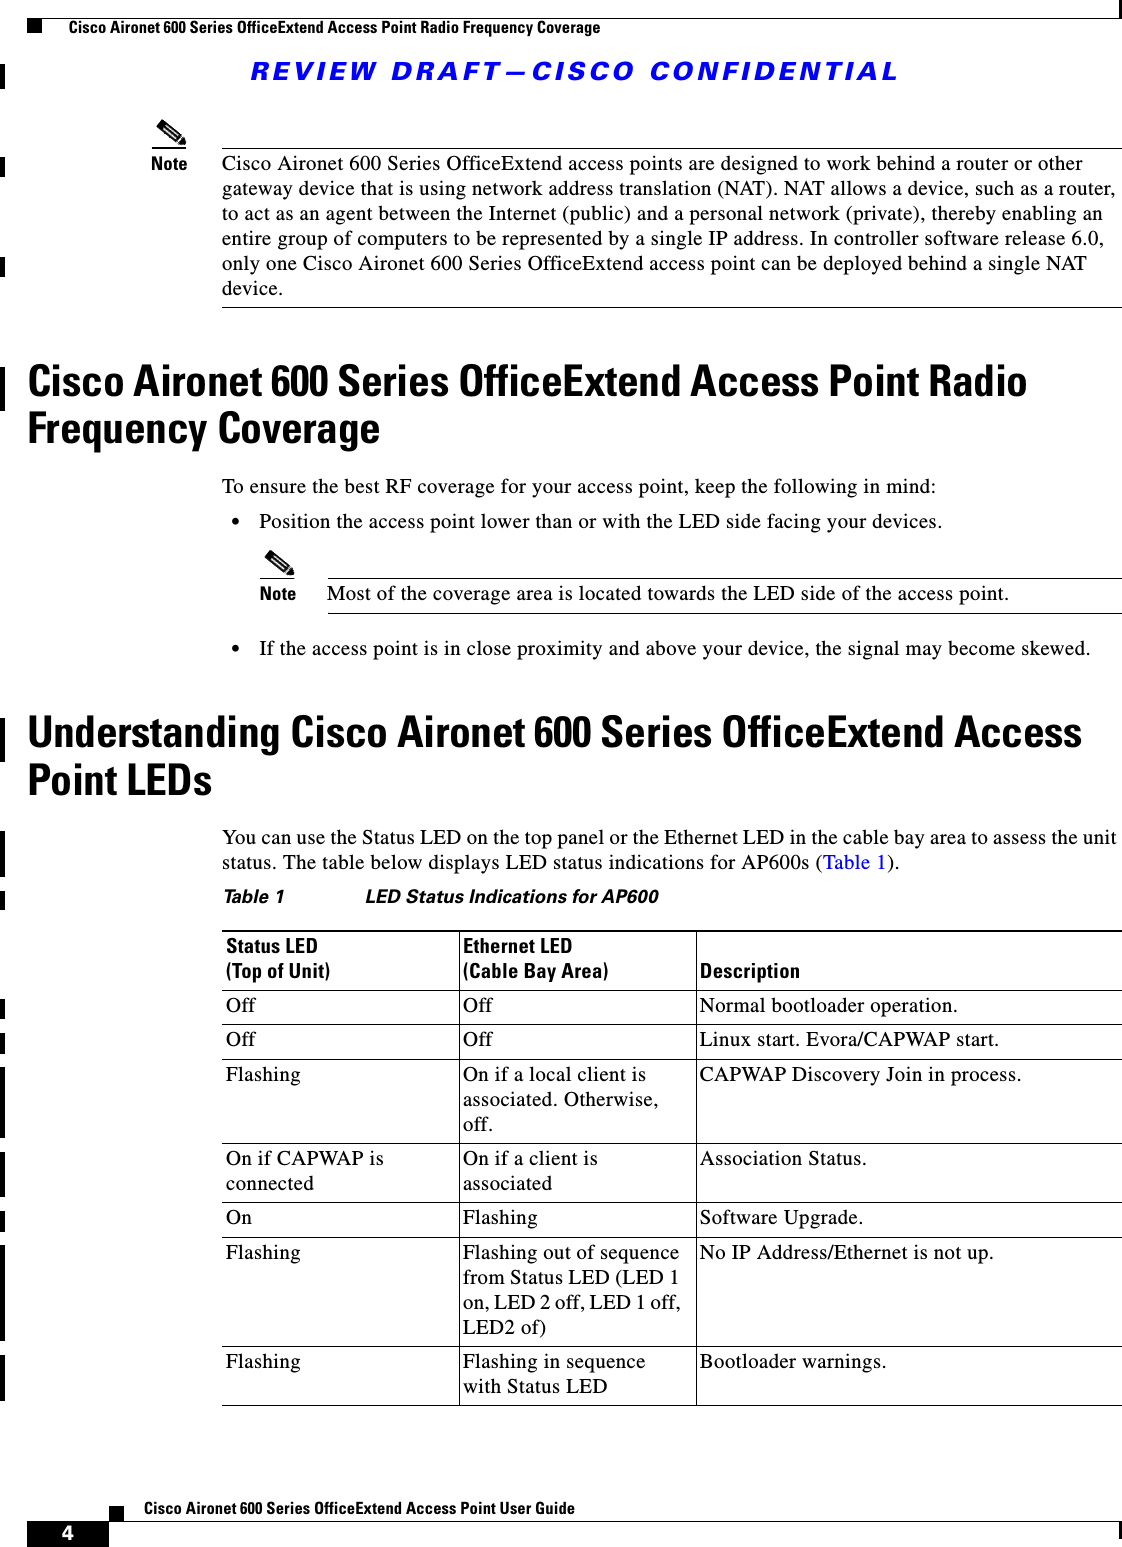 REVIEW DRAFT—CISCO CONFIDENTIAL4Cisco Aironet 600 Series OfficeExtend Access Point User Guide  Cisco Aironet 600 Series OfficeExtend Access Point Radio Frequency CoverageNote Cisco Aironet 600 Series OfficeExtend access points are designed to work behind a router or other gateway device that is using network address translation (NAT). NAT allows a device, such as a router, to act as an agent between the Internet (public) and a personal network (private), thereby enabling an entire group of computers to be represented by a single IP address. In controller software release 6.0, only one Cisco Aironet 600 Series OfficeExtend access point can be deployed behind a single NAT device.Cisco Aironet 600 Series OfficeExtend Access Point Radio Frequency CoverageTo ensure the best RF coverage for your access point, keep the following in mind:  • Position the access point lower than or with the LED side facing your devices.Note Most of the coverage area is located towards the LED side of the access point.  • If the access point is in close proximity and above your device, the signal may become skewed.Understanding Cisco Aironet 600 Series OfficeExtend Access Point LEDsYou can use the Status LED on the top panel or the Ethernet LED in the cable bay area to assess the unit status. The table below displays LED status indications for AP600s (Table 1).Ta b l e  1 LED Status Indications for AP600Status LED (Top of Unit)Ethernet LED (Cable Bay Area) DescriptionOff Off Normal bootloader operation.Off Off Linux start. Evora/CAPWAP start.Flashing On if a local client is associated. Otherwise, off.CAPWAP Discovery Join in process.On if CAPWAP is connectedOn if a client is associatedAssociation Status.On Flashing Software Upgrade.Flashing Flashing out of sequence from Status LED (LED 1 on, LED 2 off, LED 1 off, LED2 of)No IP Address/Ethernet is not up.Flashing Flashing in sequence with Status LEDBootloader warnings.